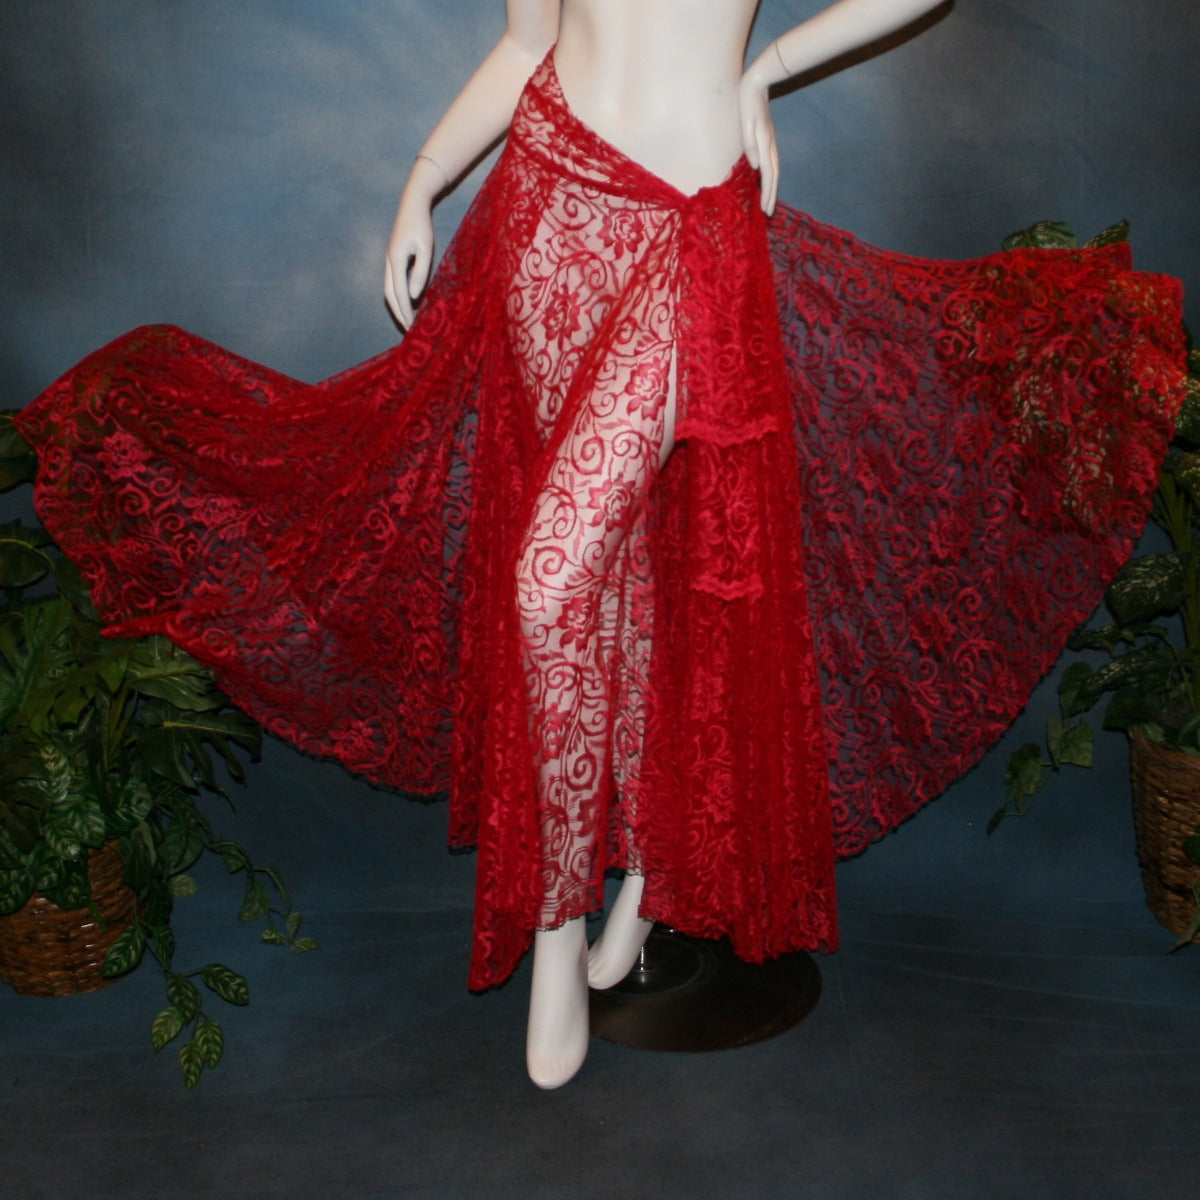 Crystal's Creations Red lace ballroom skirt, wrap style, was created with yards of red lace, many panels shaped like large petals.